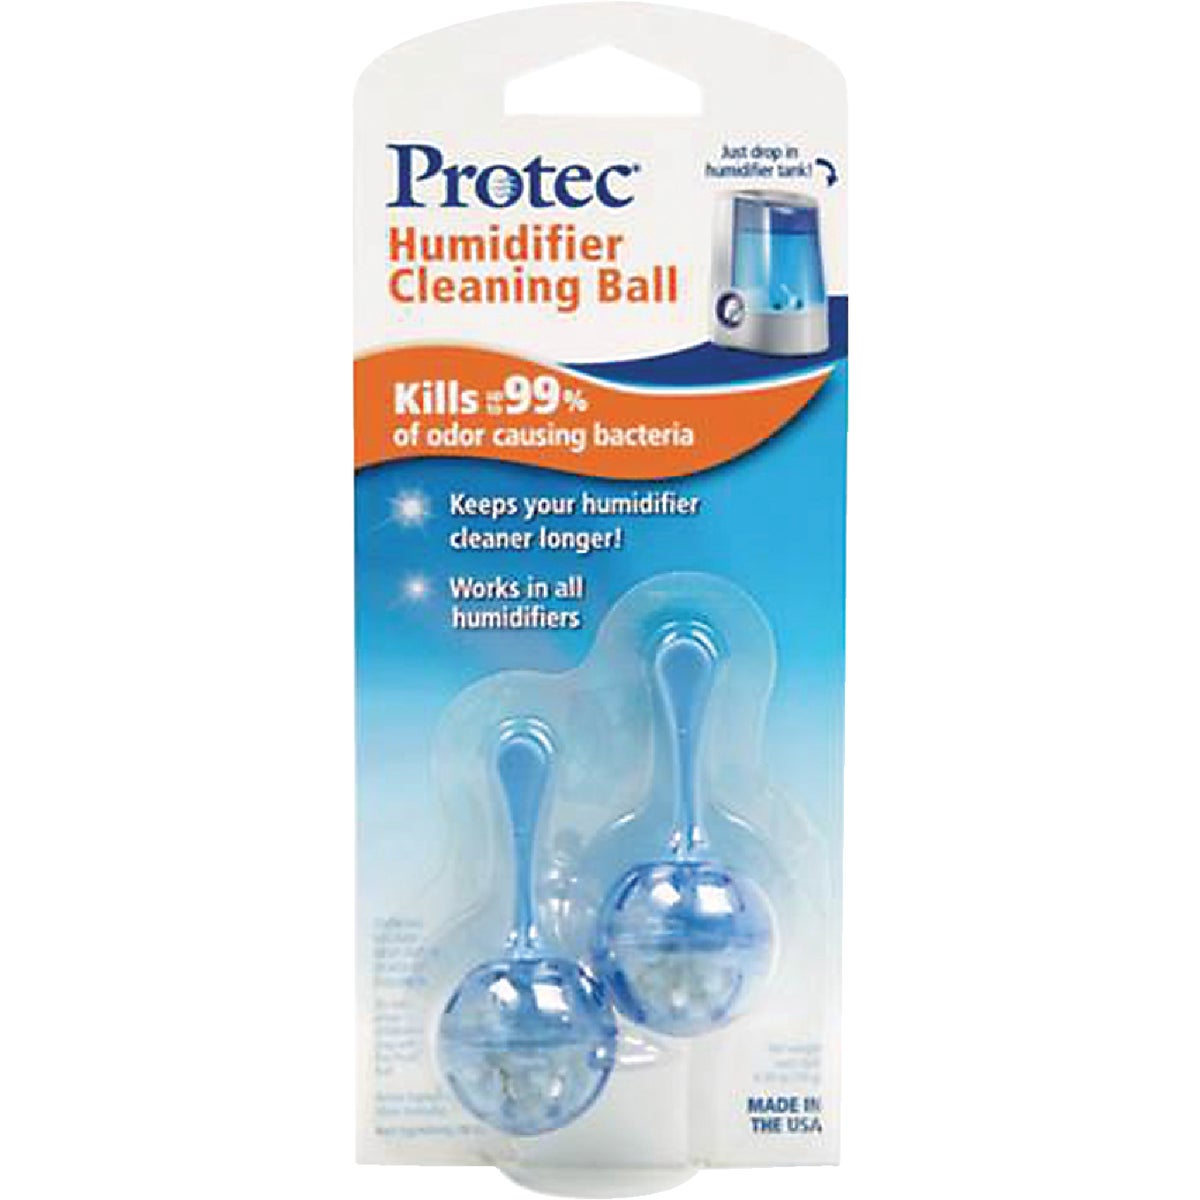 Item 501031, Humidifier cleaning ball. Kills 99% of odor causing bacteria.